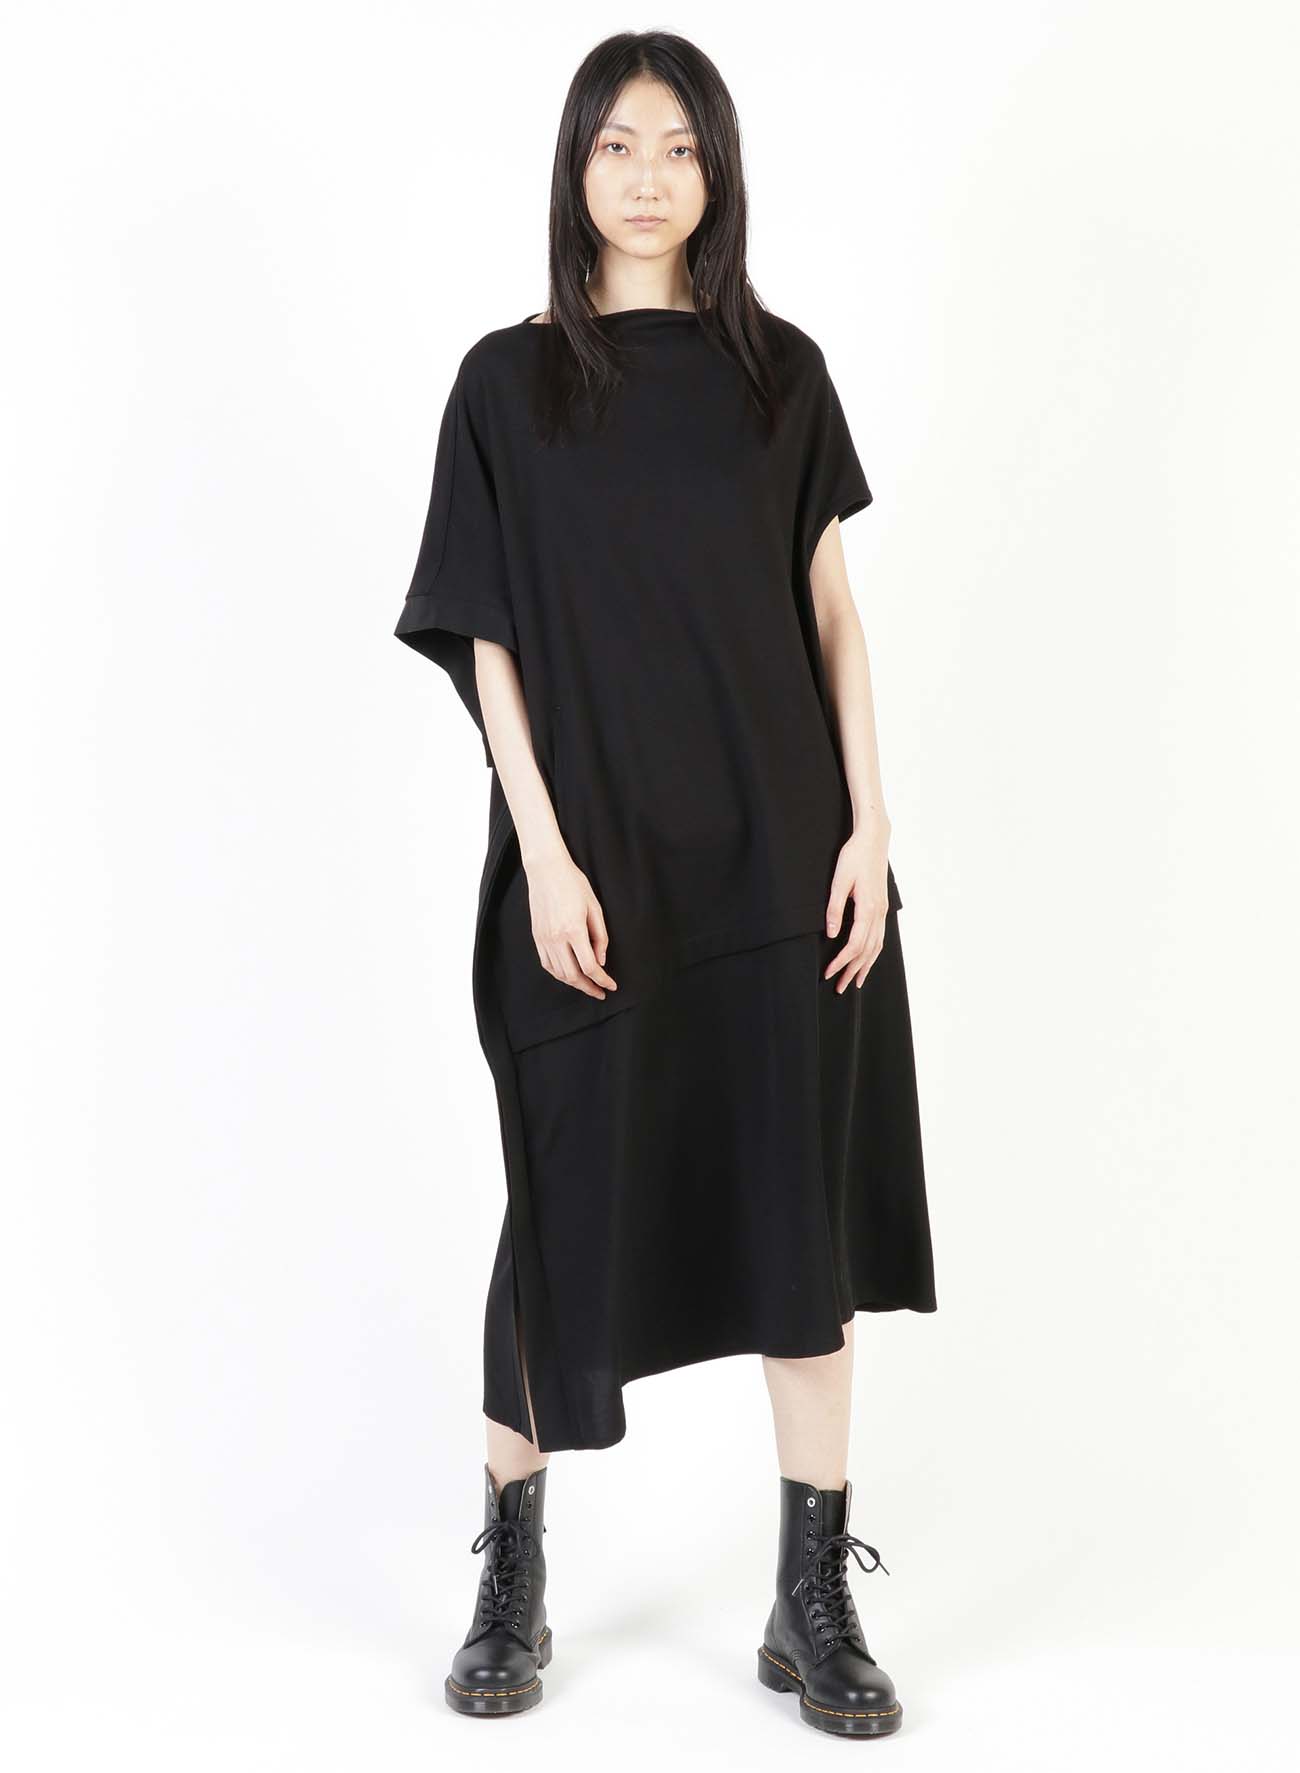 TRIACETATE POLYESTER de CHINE BIAS CUT AND SEW COMBINATION